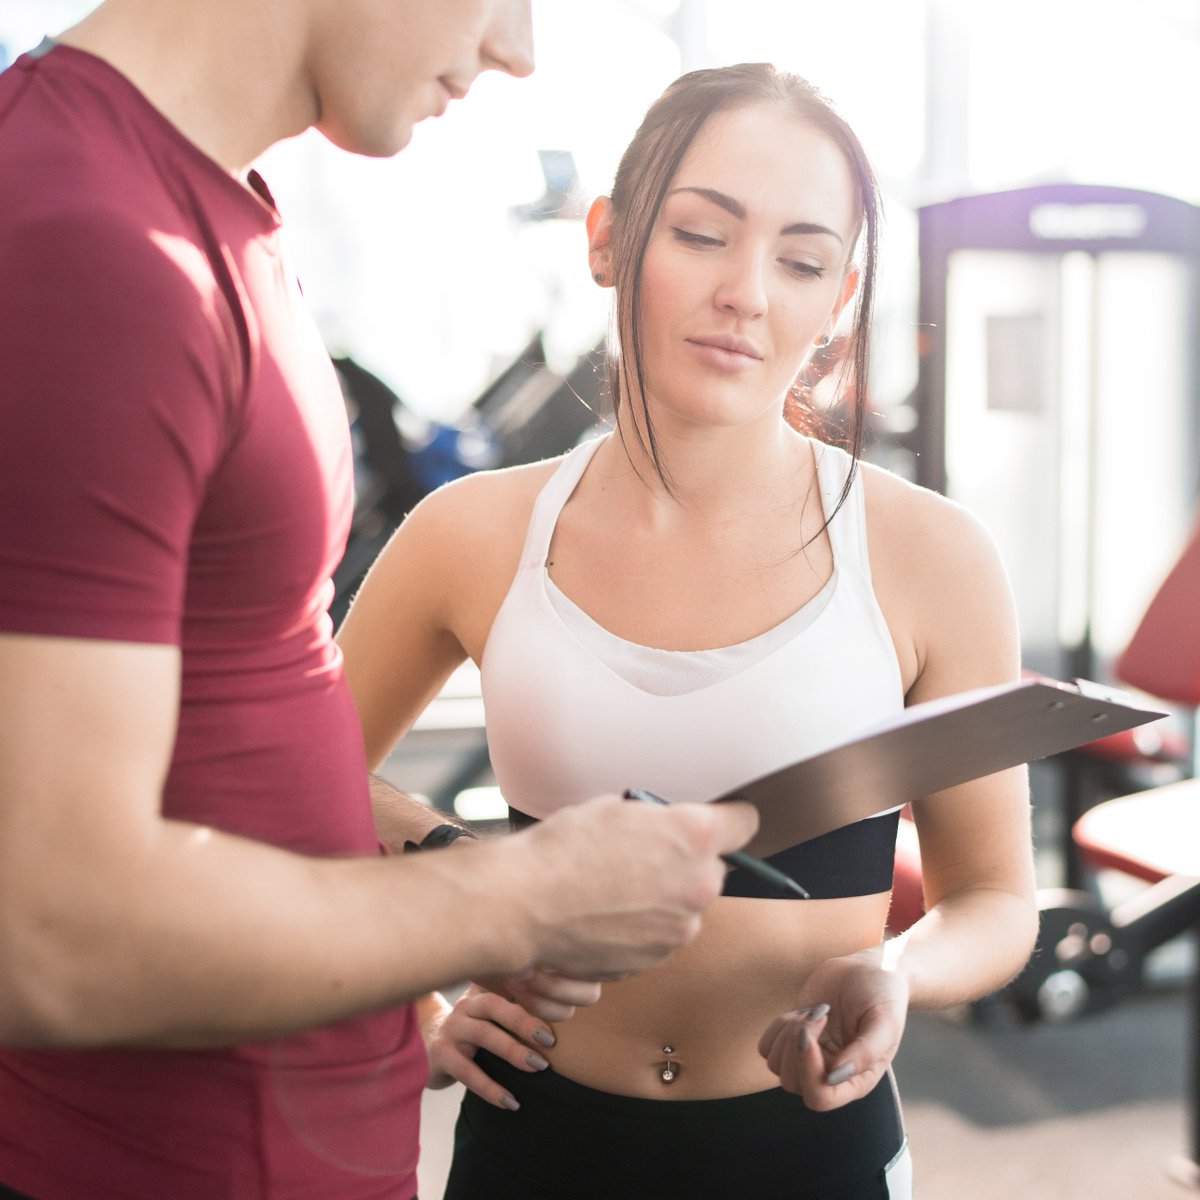 Local to York and looking to get in shape? There’s no better time to start than now! That’s why the Leisure Club at the Principal York Hotel have made it easy with a range of new benefits. Sign up and start feeling great… it’s really that easy! bit.ly/3sZJjbH